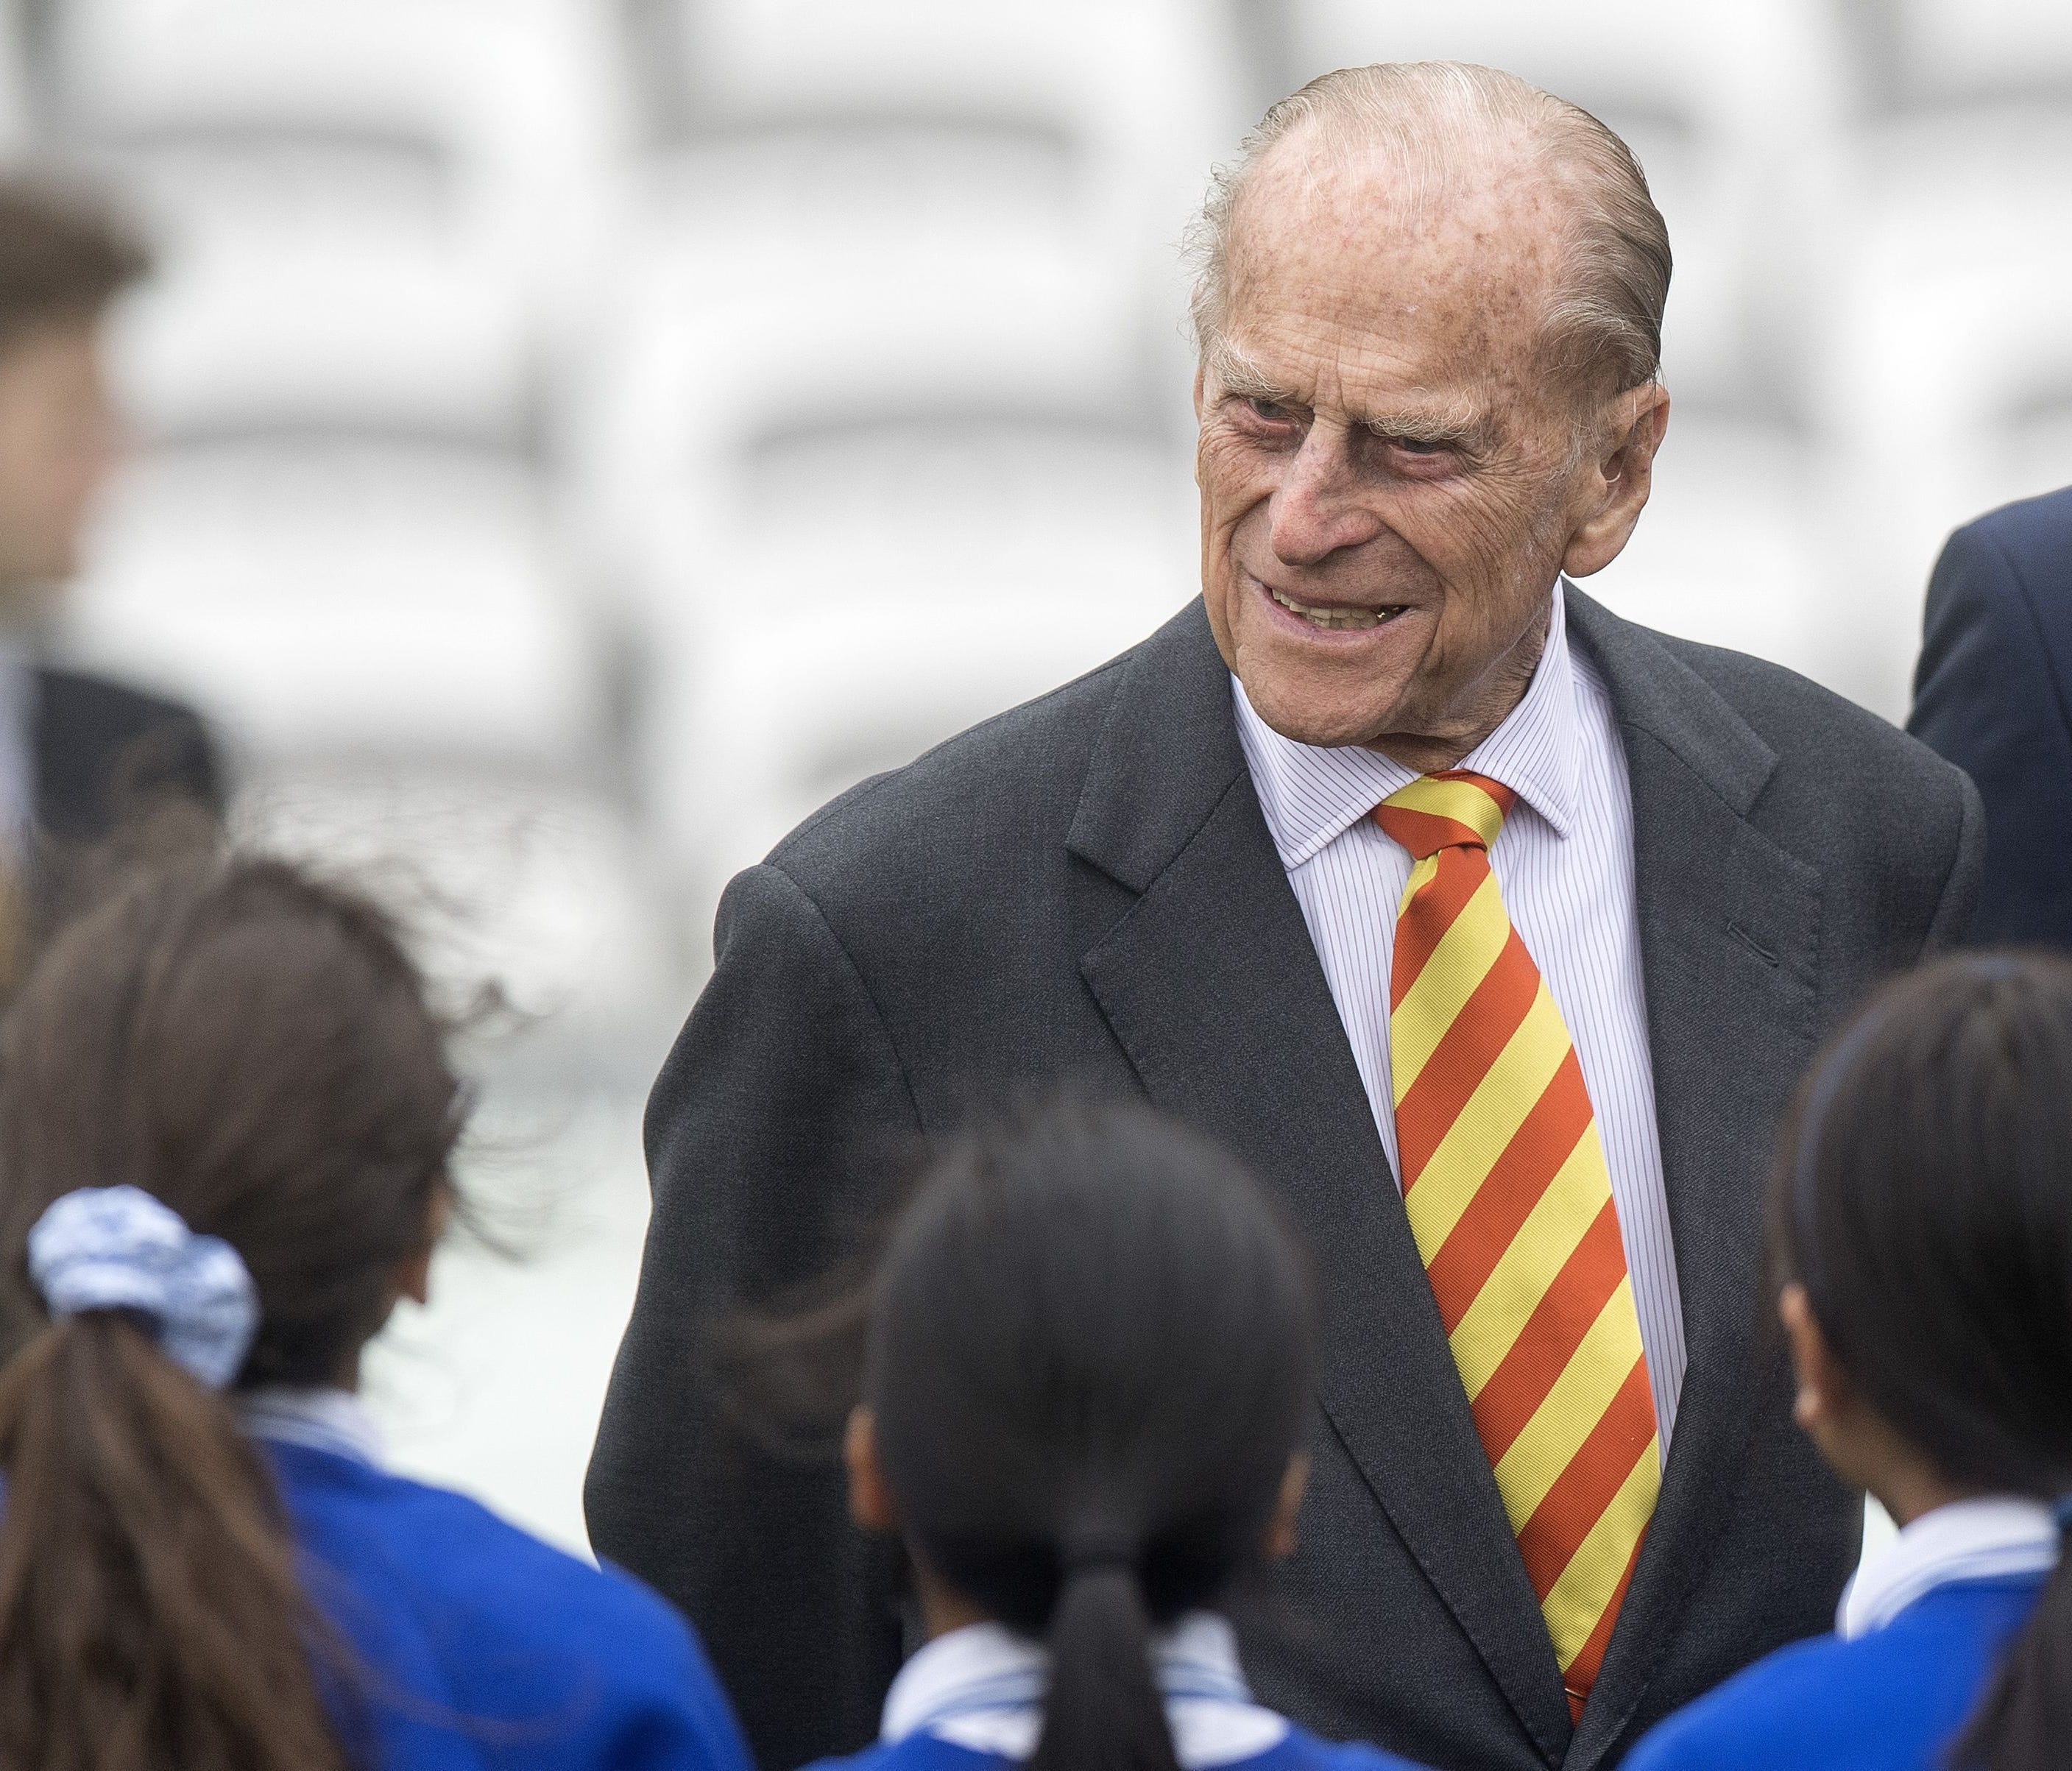 Britain's Prince Philip, the Duke of Edinburgh, is pictured during his visit to Lord's Cricket Ground to open the new Warner Stand, in London.